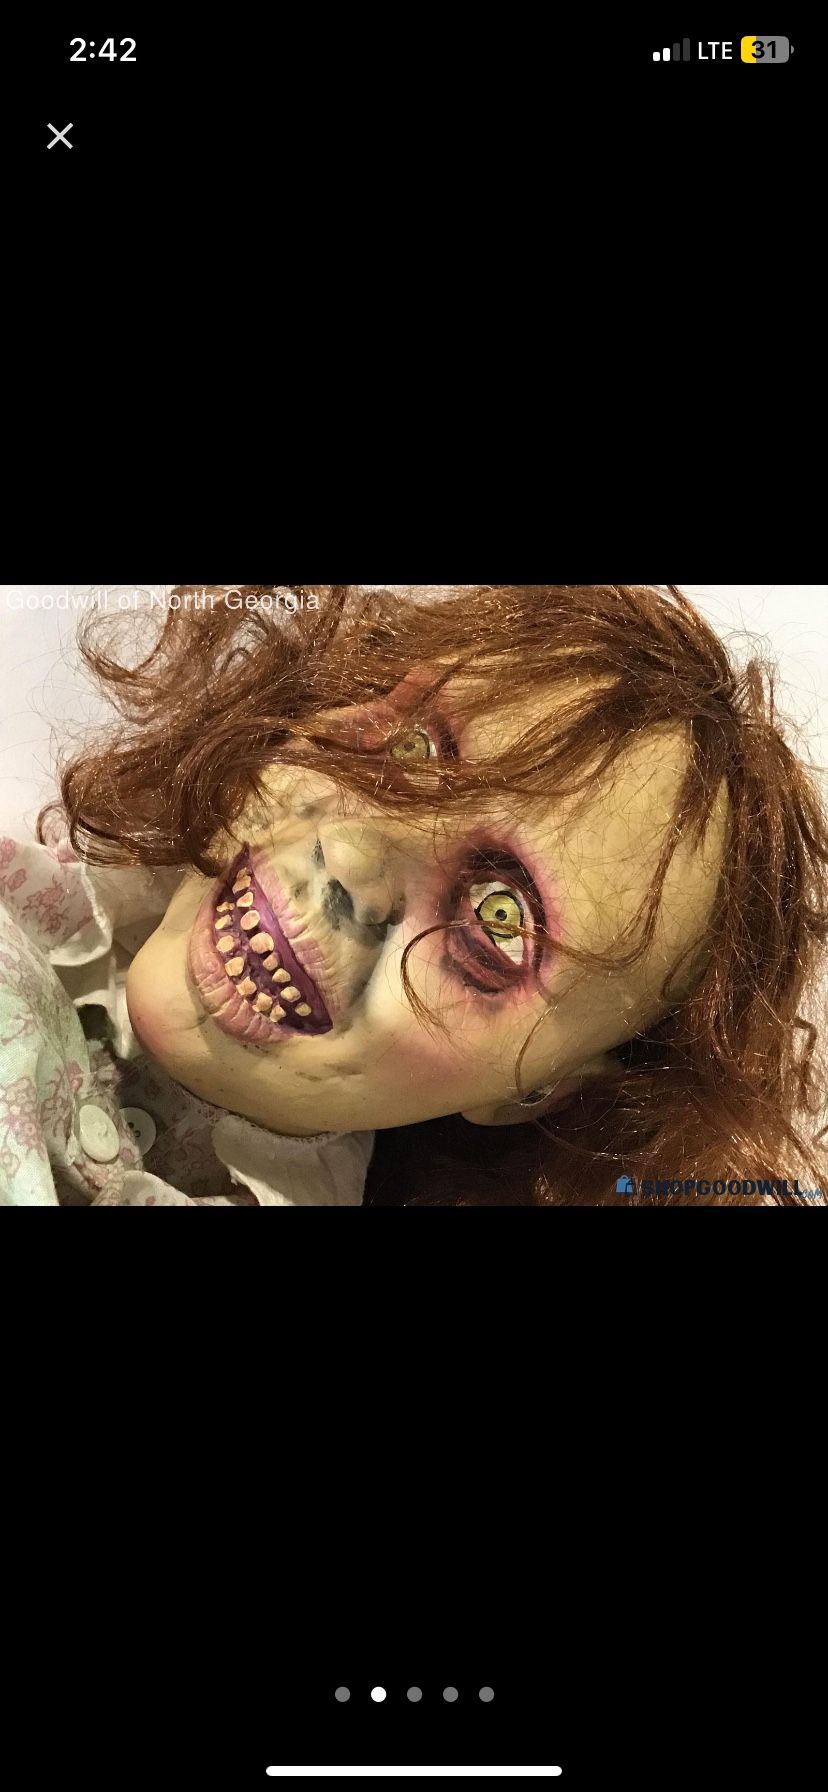 Paranormal Doll For Sale(EXHORCIST)